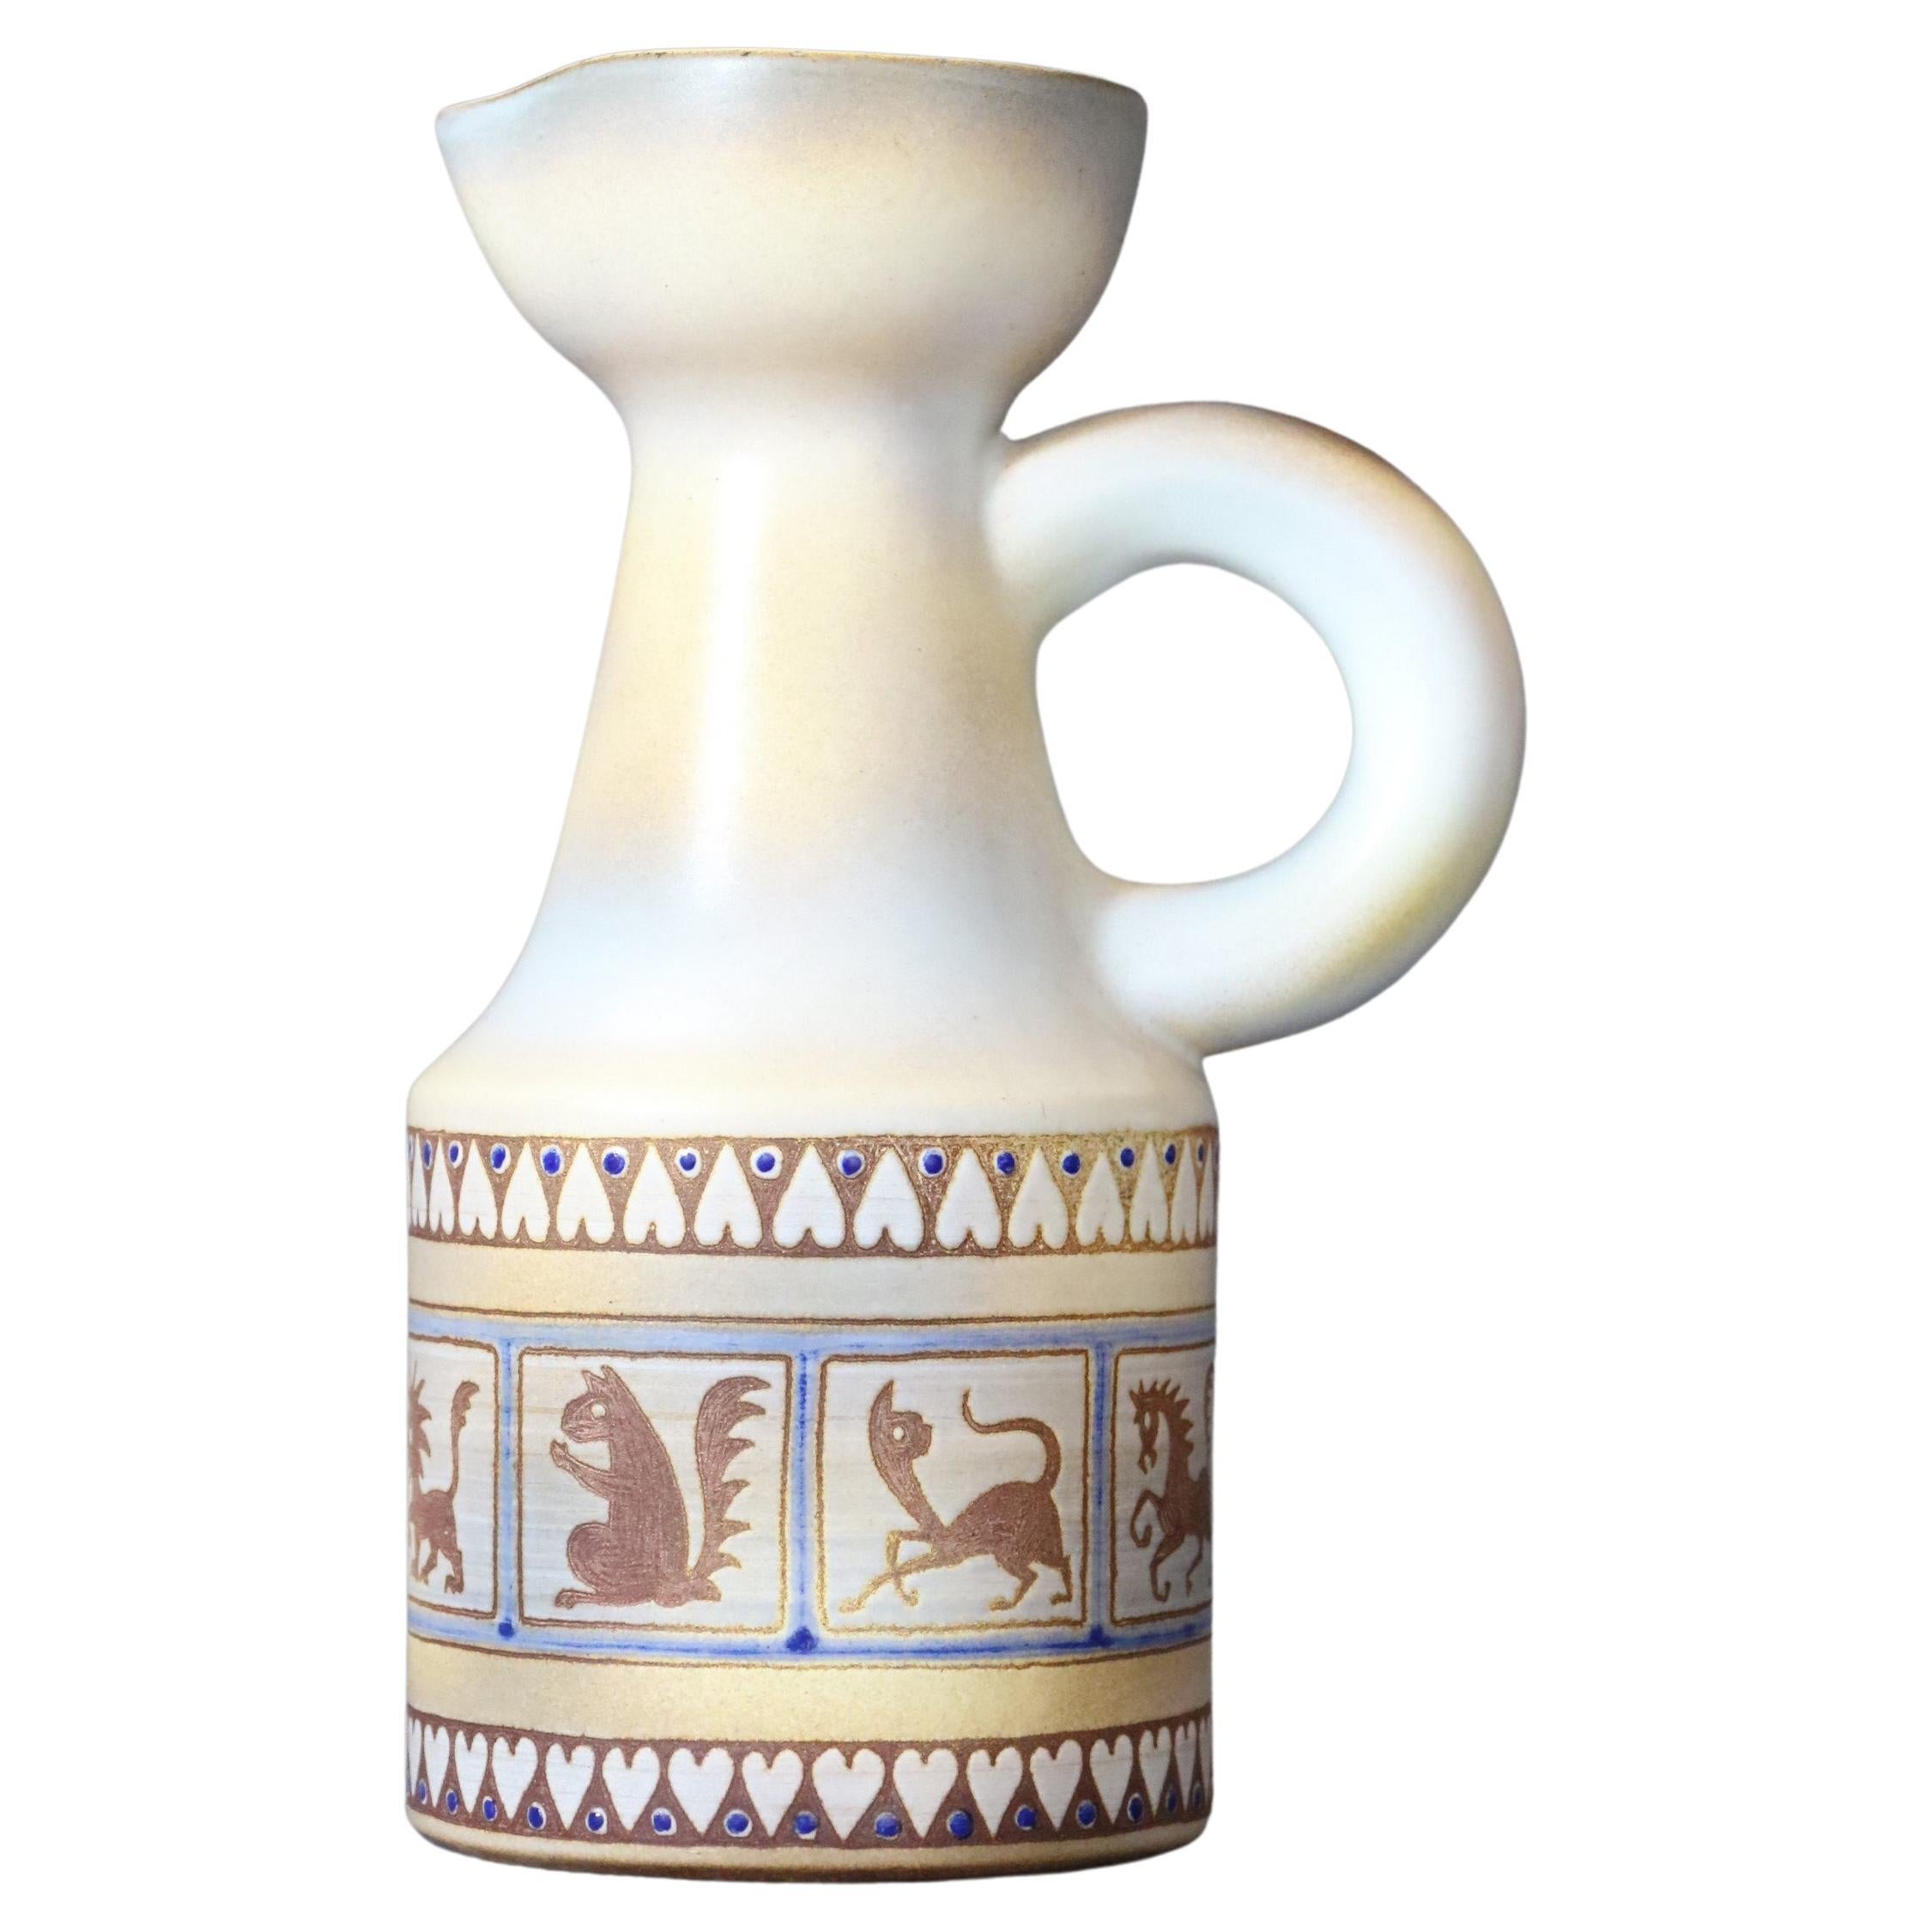 20th century French white ceramic pitcher by René Maurel, 1970's

The pitcher is glazed in a brilliant creamy white. It is decorated with an animal frieze with geometric motifs and colored in pale tones. 
It is signed. 
It is in a very good